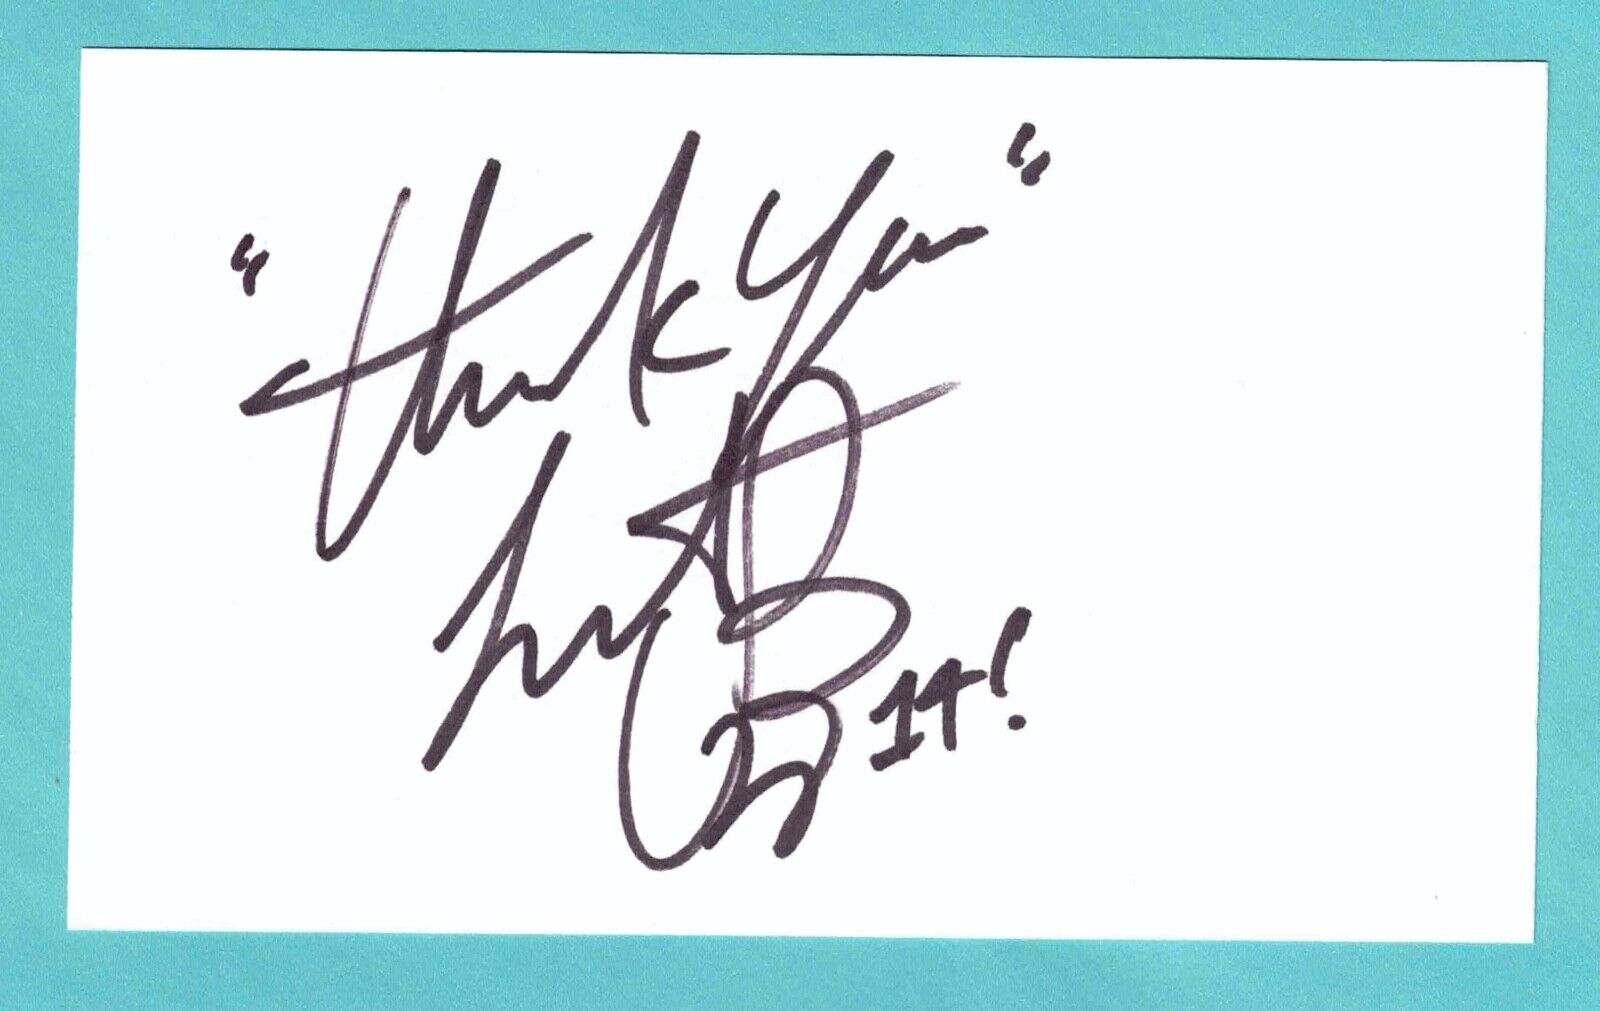 Charlie Watts Signed Autograph 3x5 Index Card Rolling Stones Original Drummer 